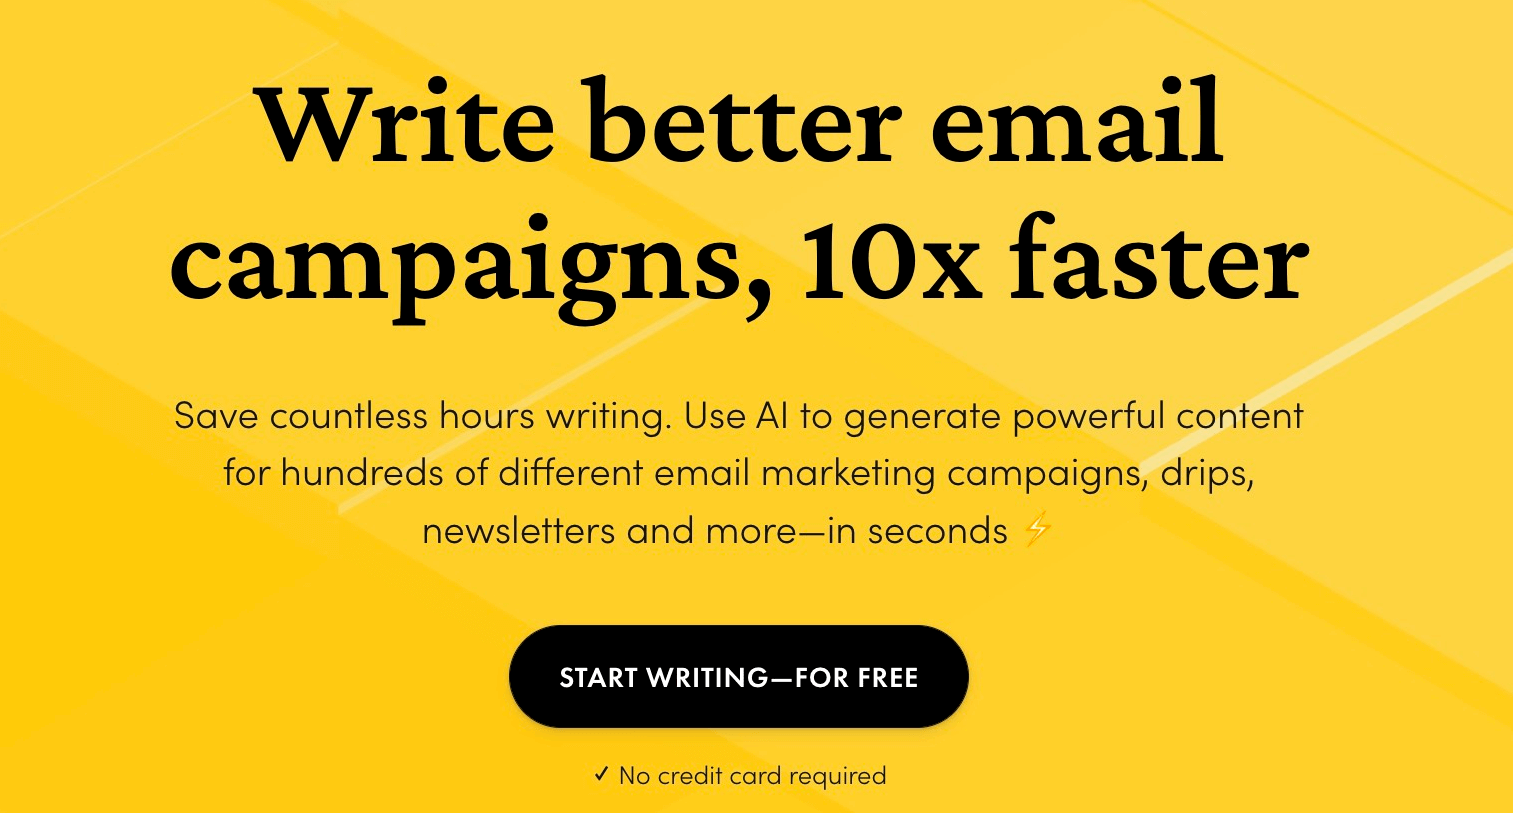 Hoppy Copy's front page slogan reads “Write better email campaigns, 10x faster”